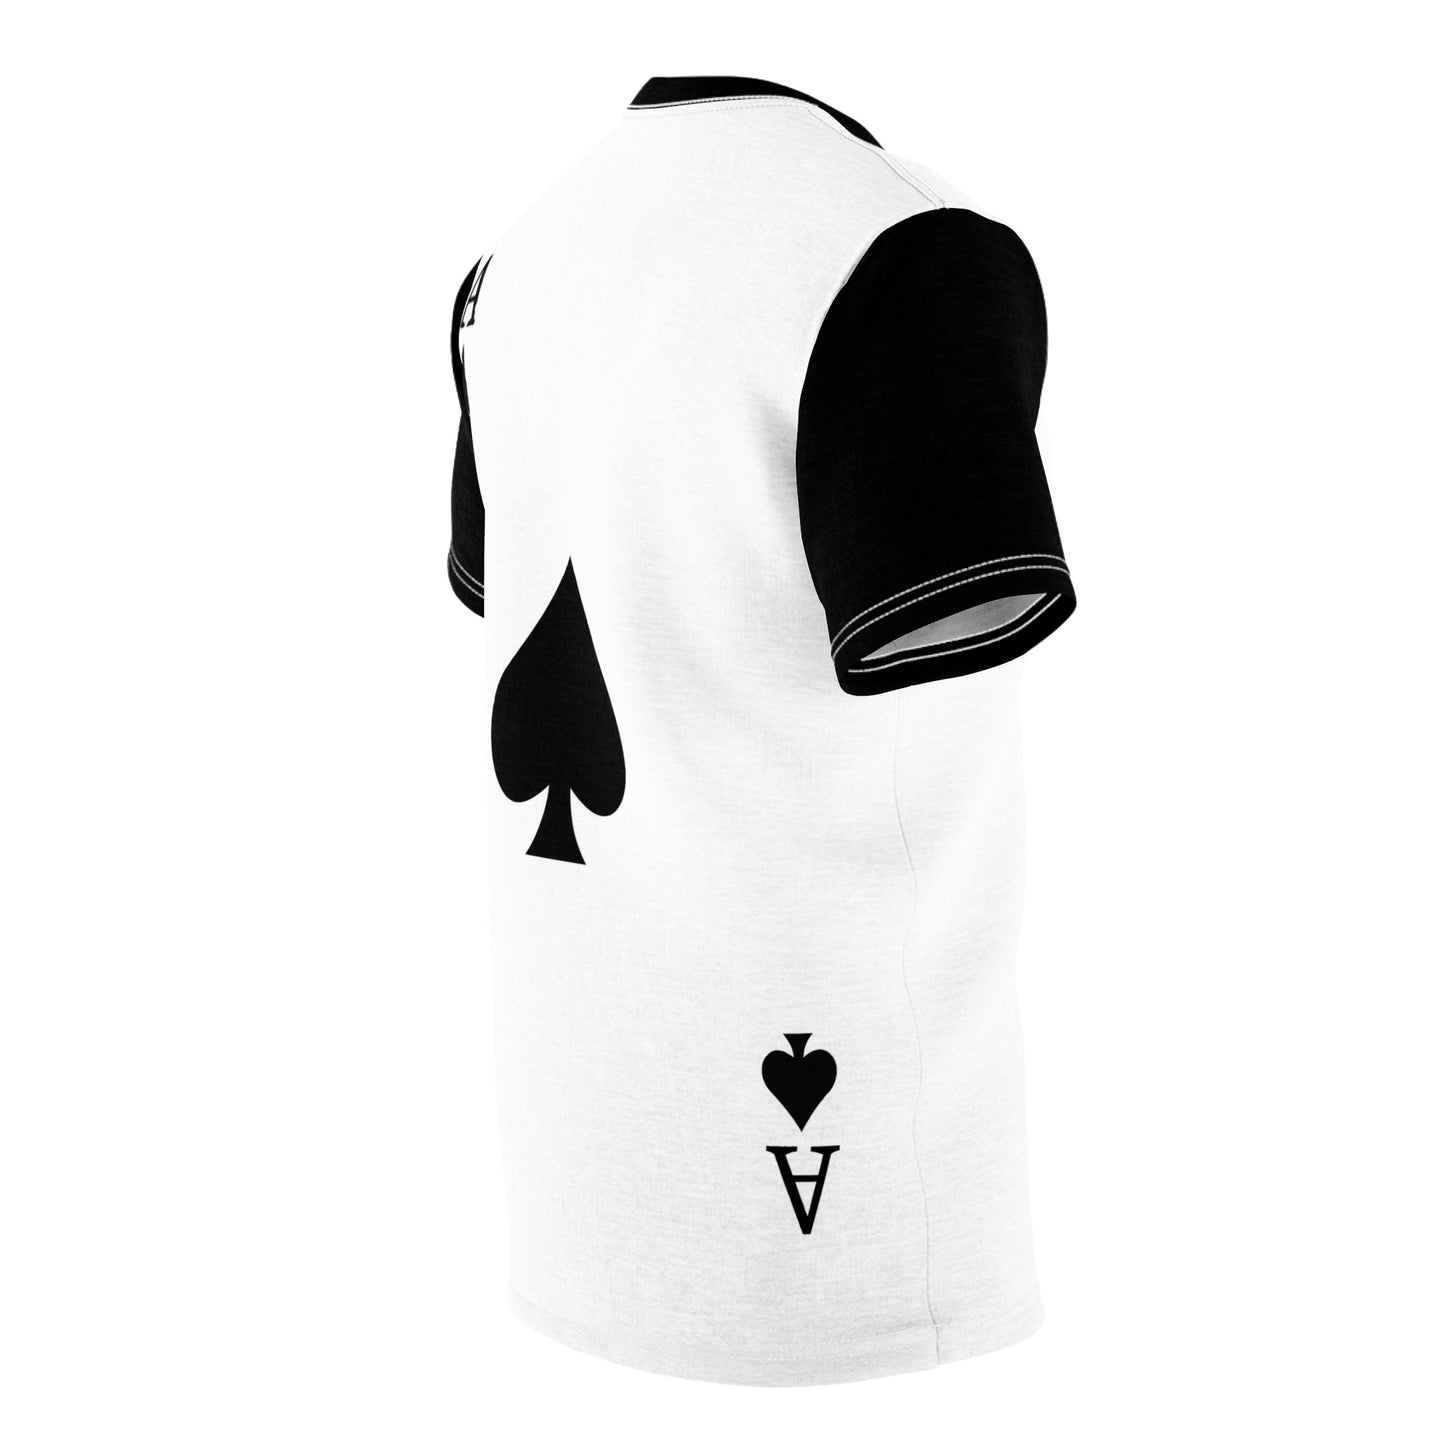 Ace of Spades Playing Card Unisex Tee Ace of SpadesaliceAdult T-ShirtWrong Lever Clothing